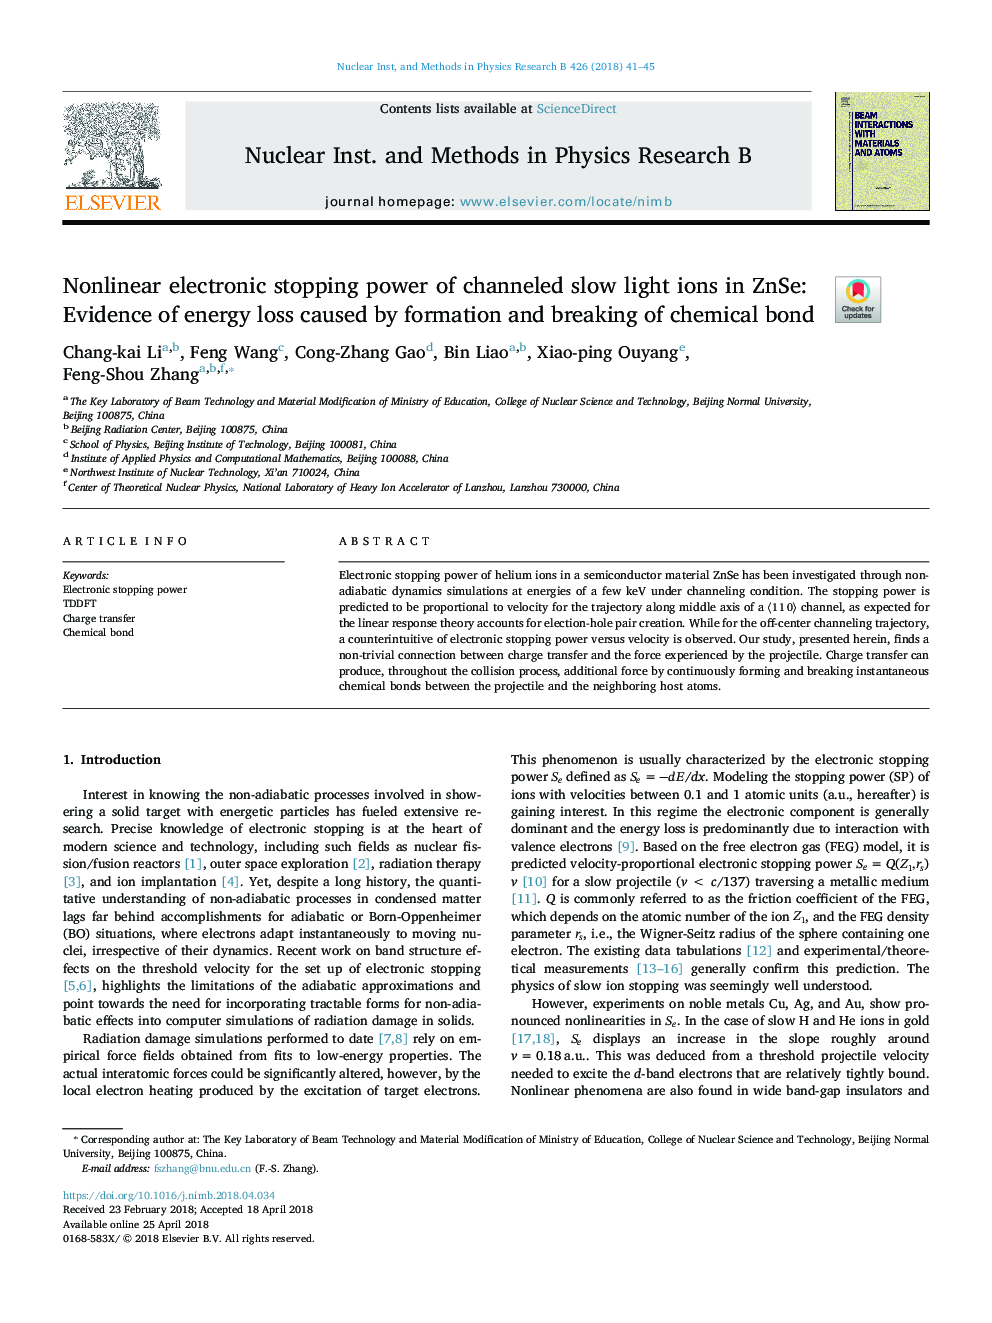 Nonlinear electronic stopping power of channeled slow light ions in ZnSe: Evidence of energy loss caused by formation and breaking of chemical bond